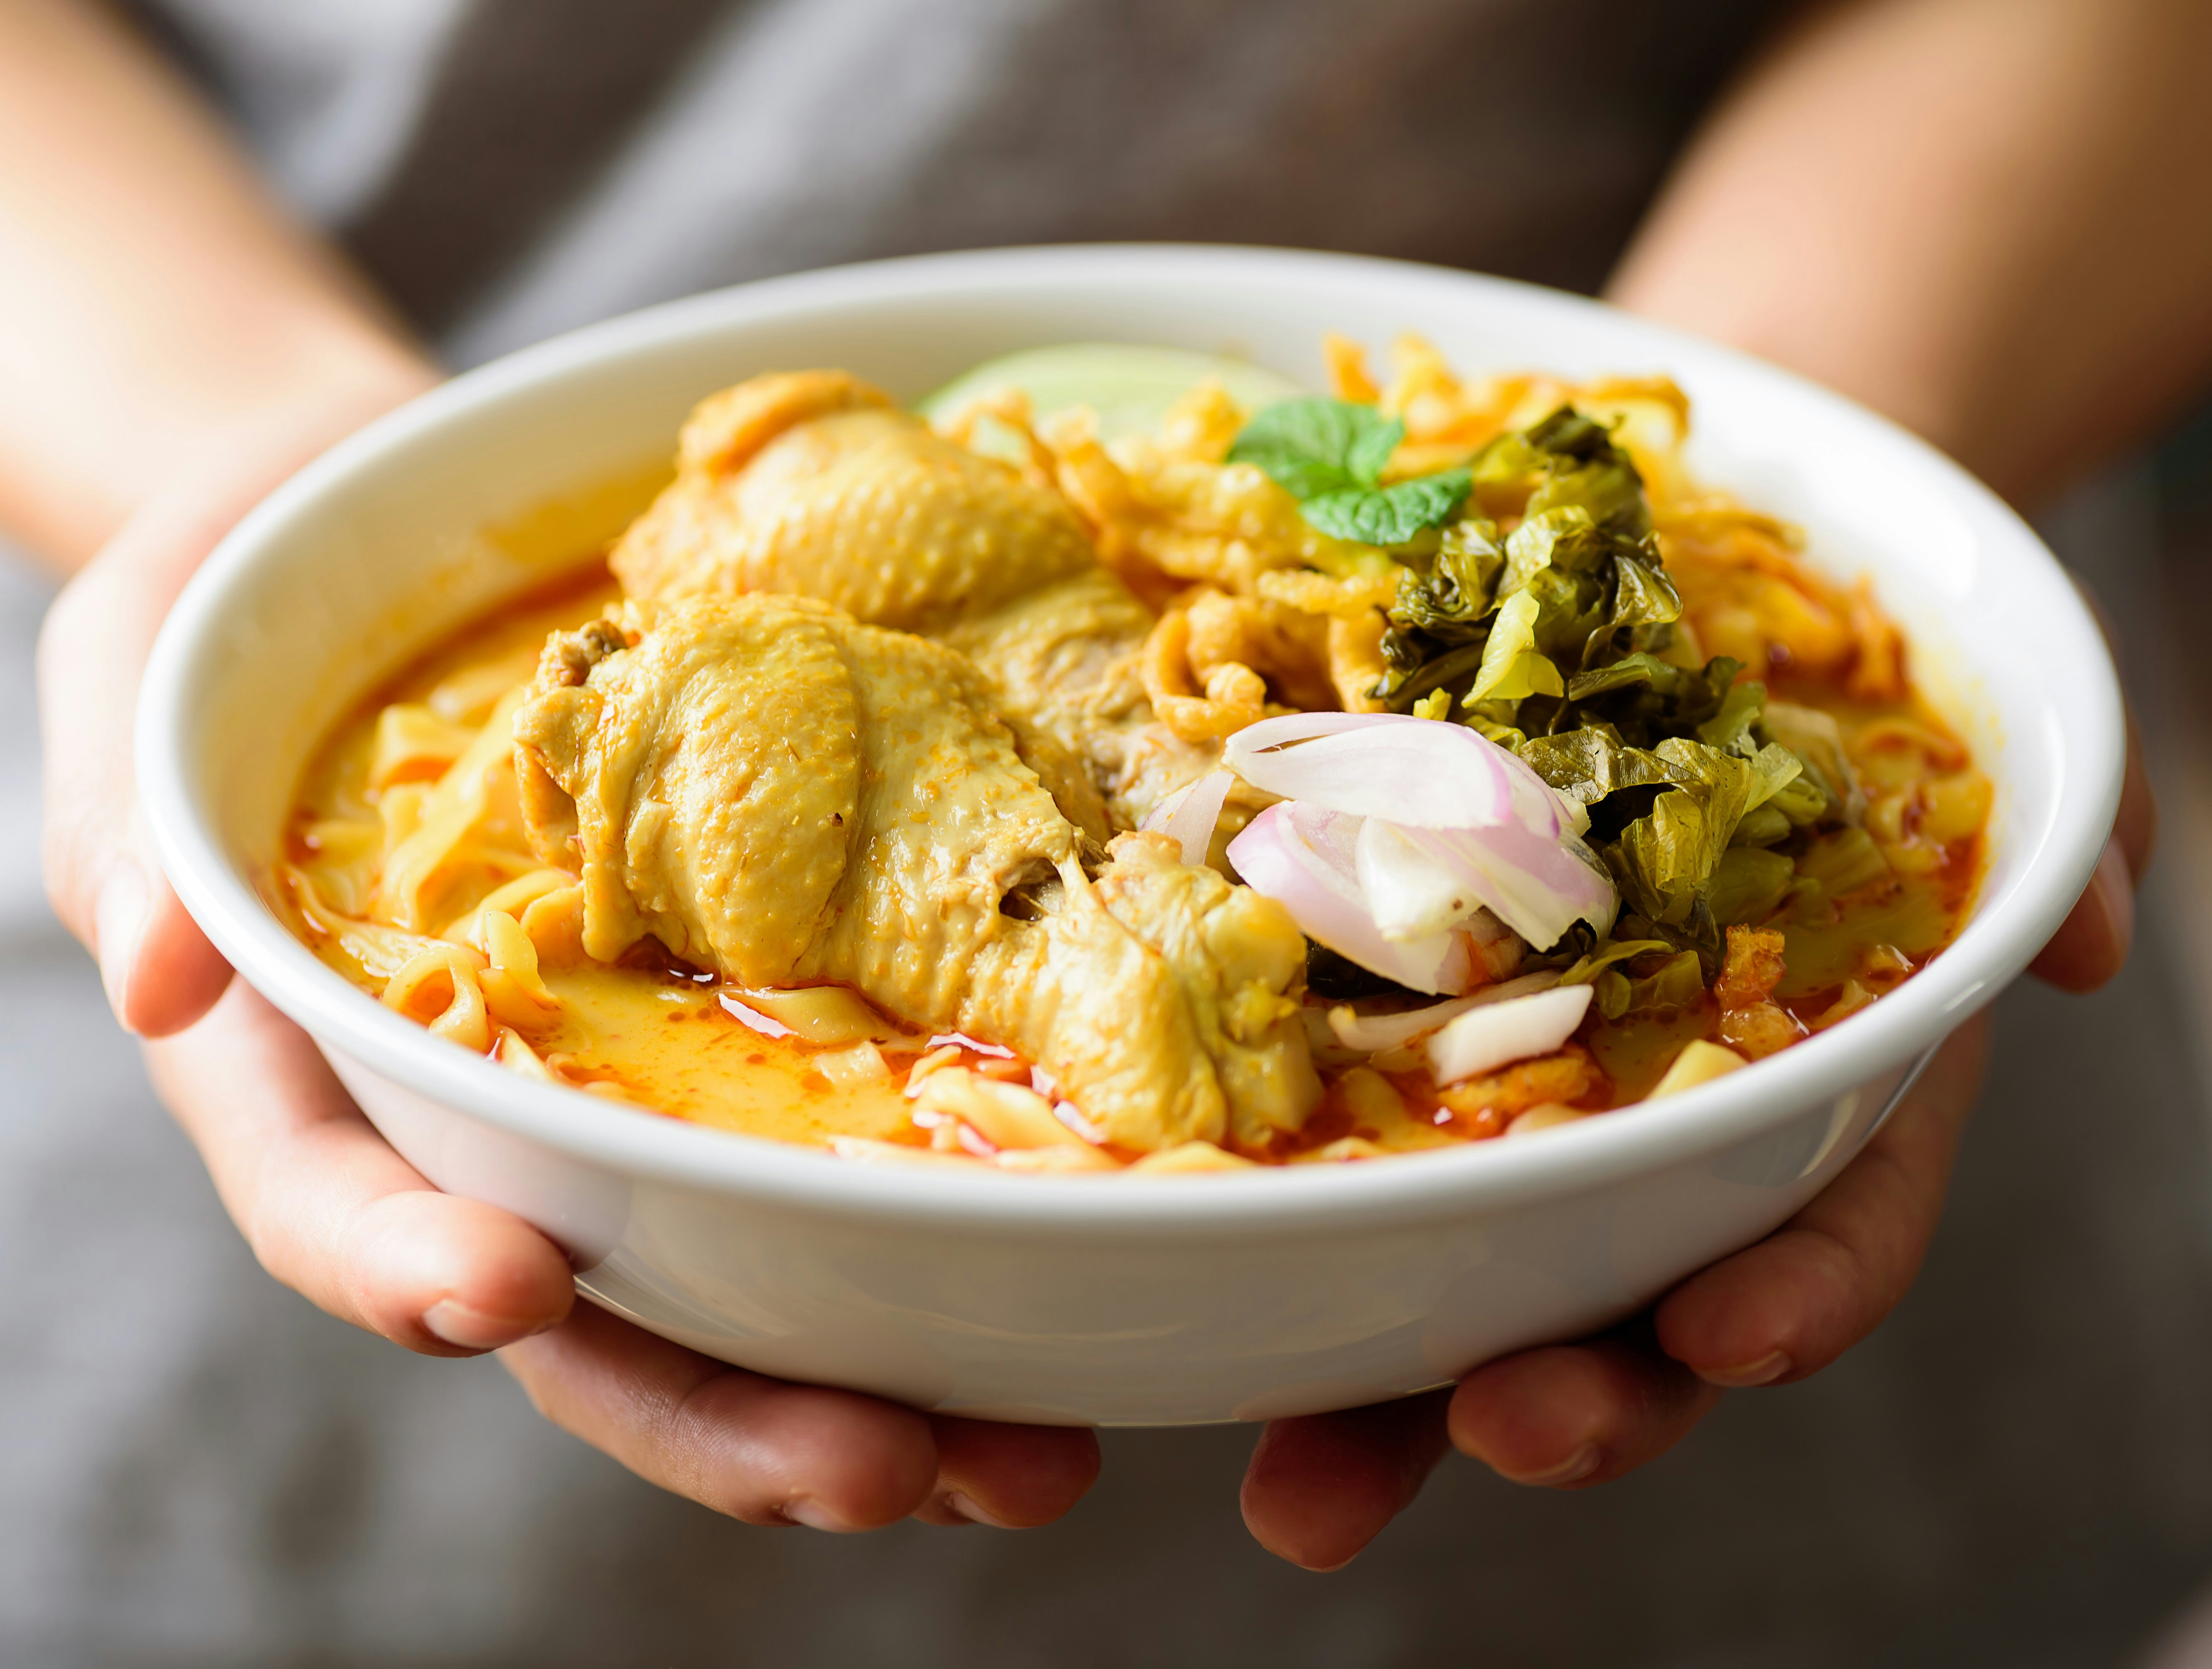 Two hands hold out a bowl of steaming khow suey, a Burmese soup dish containing noodles, vegetables and meat, in a creamy, yellow-coloured broth.